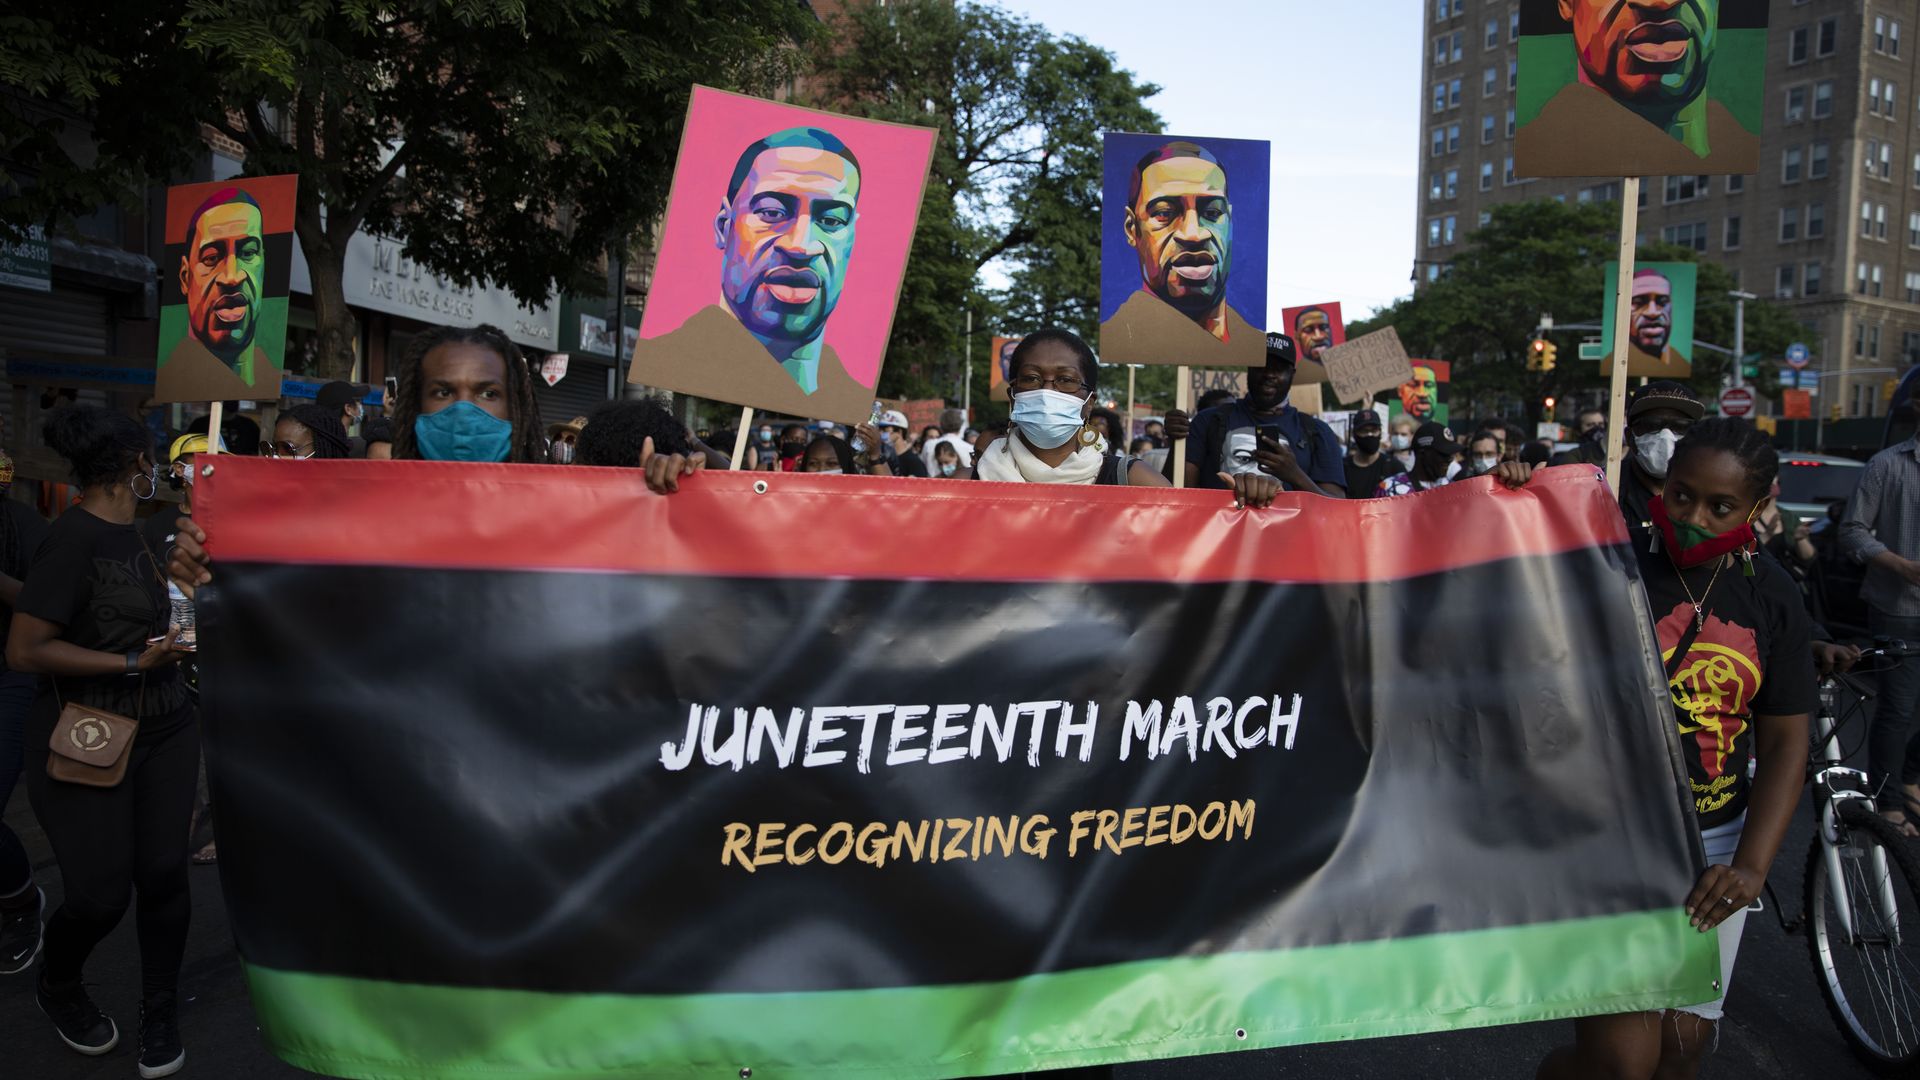 Protesters carry banners and posters of George Floyd during the Juneteenth march on June 19, 2020 in the Brooklyn.